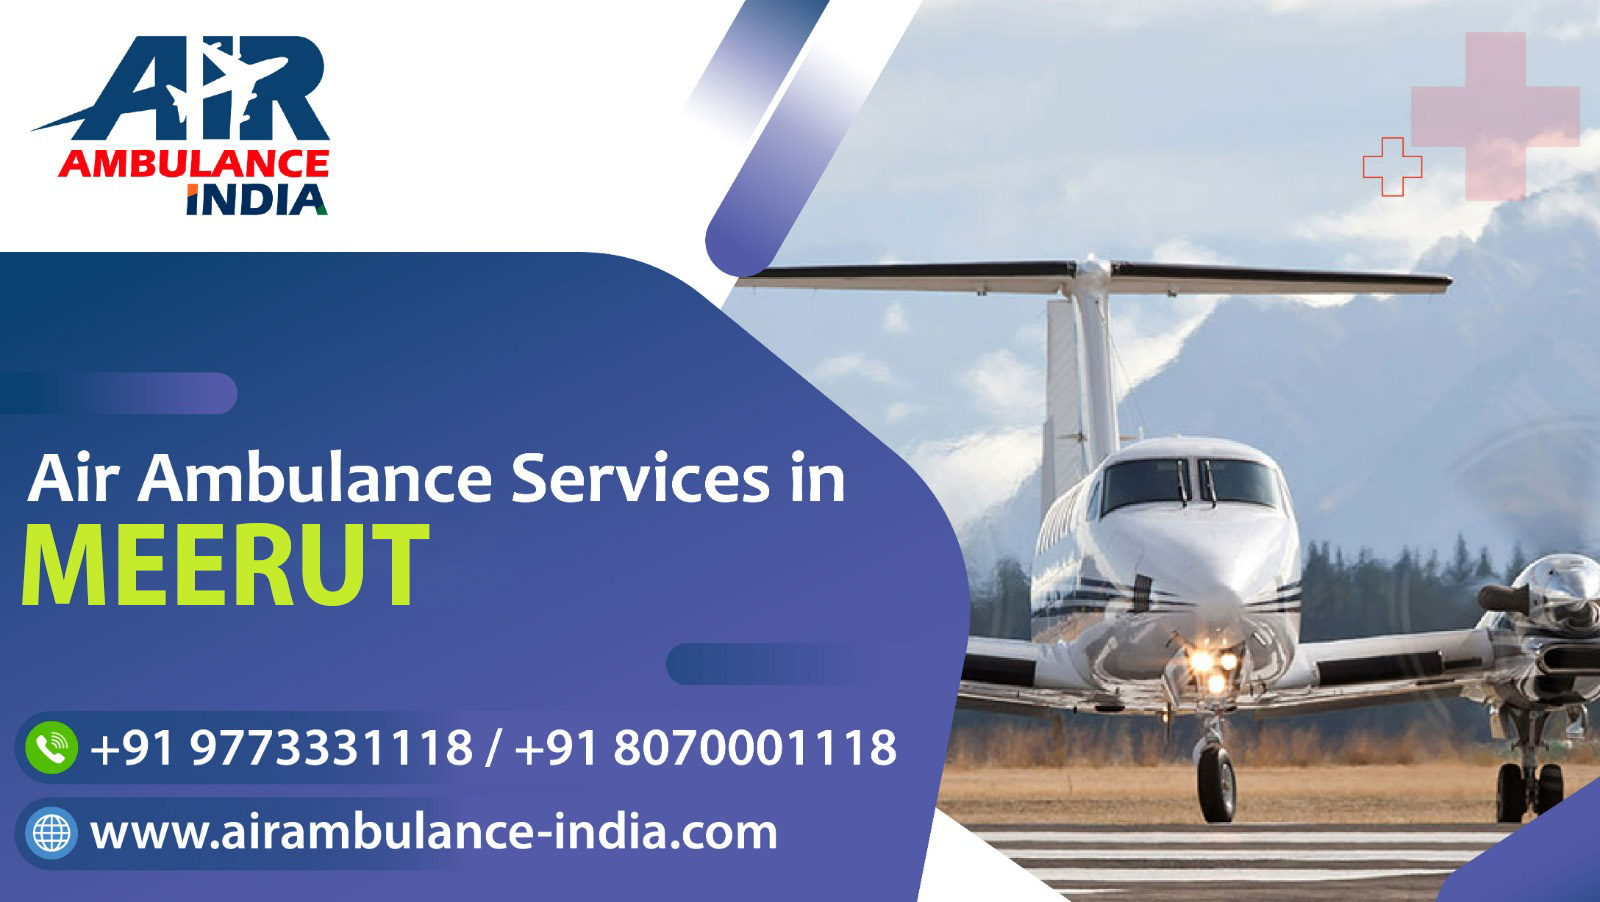 Air Ambulance Services in Meerut